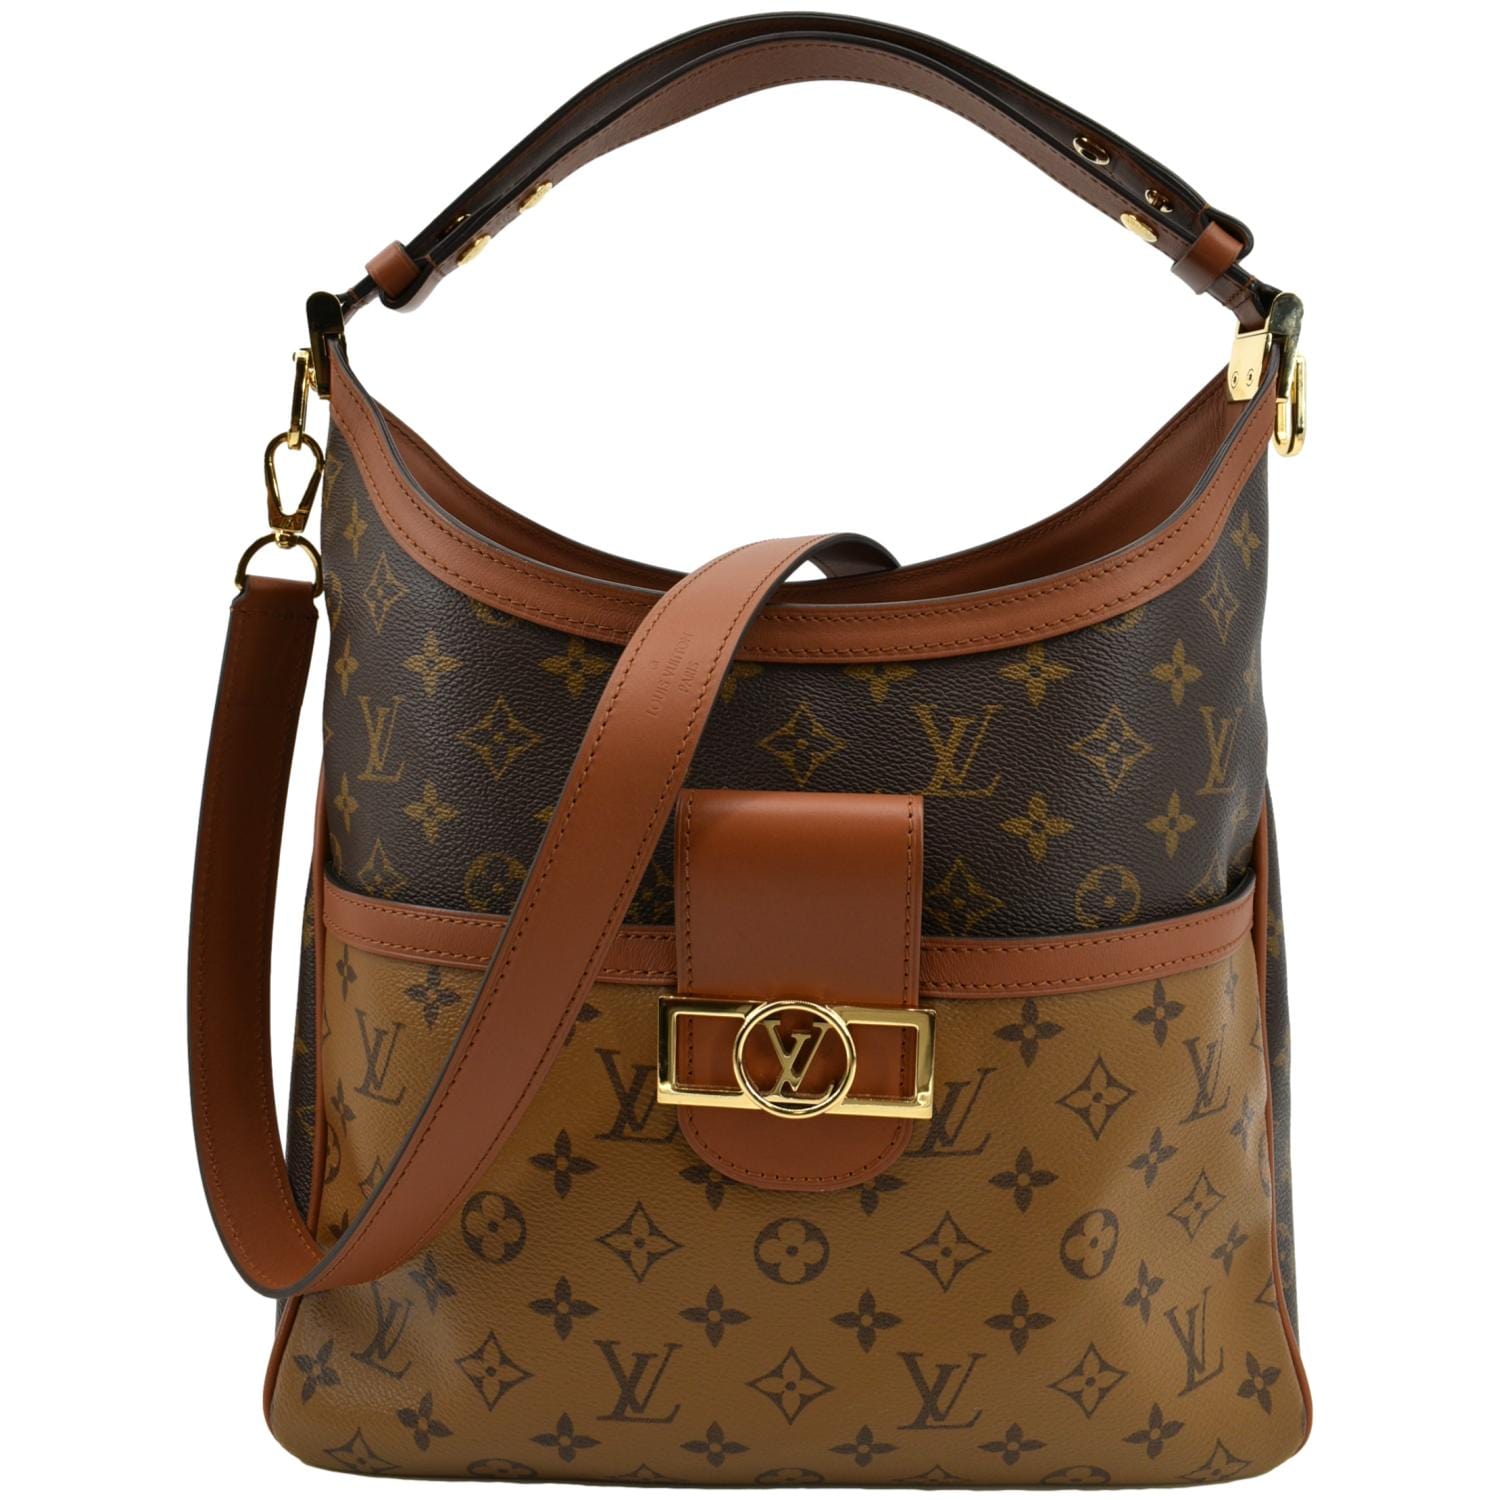 Louis Vuitton Dauphine bag is the one worth buying. Unfortunately